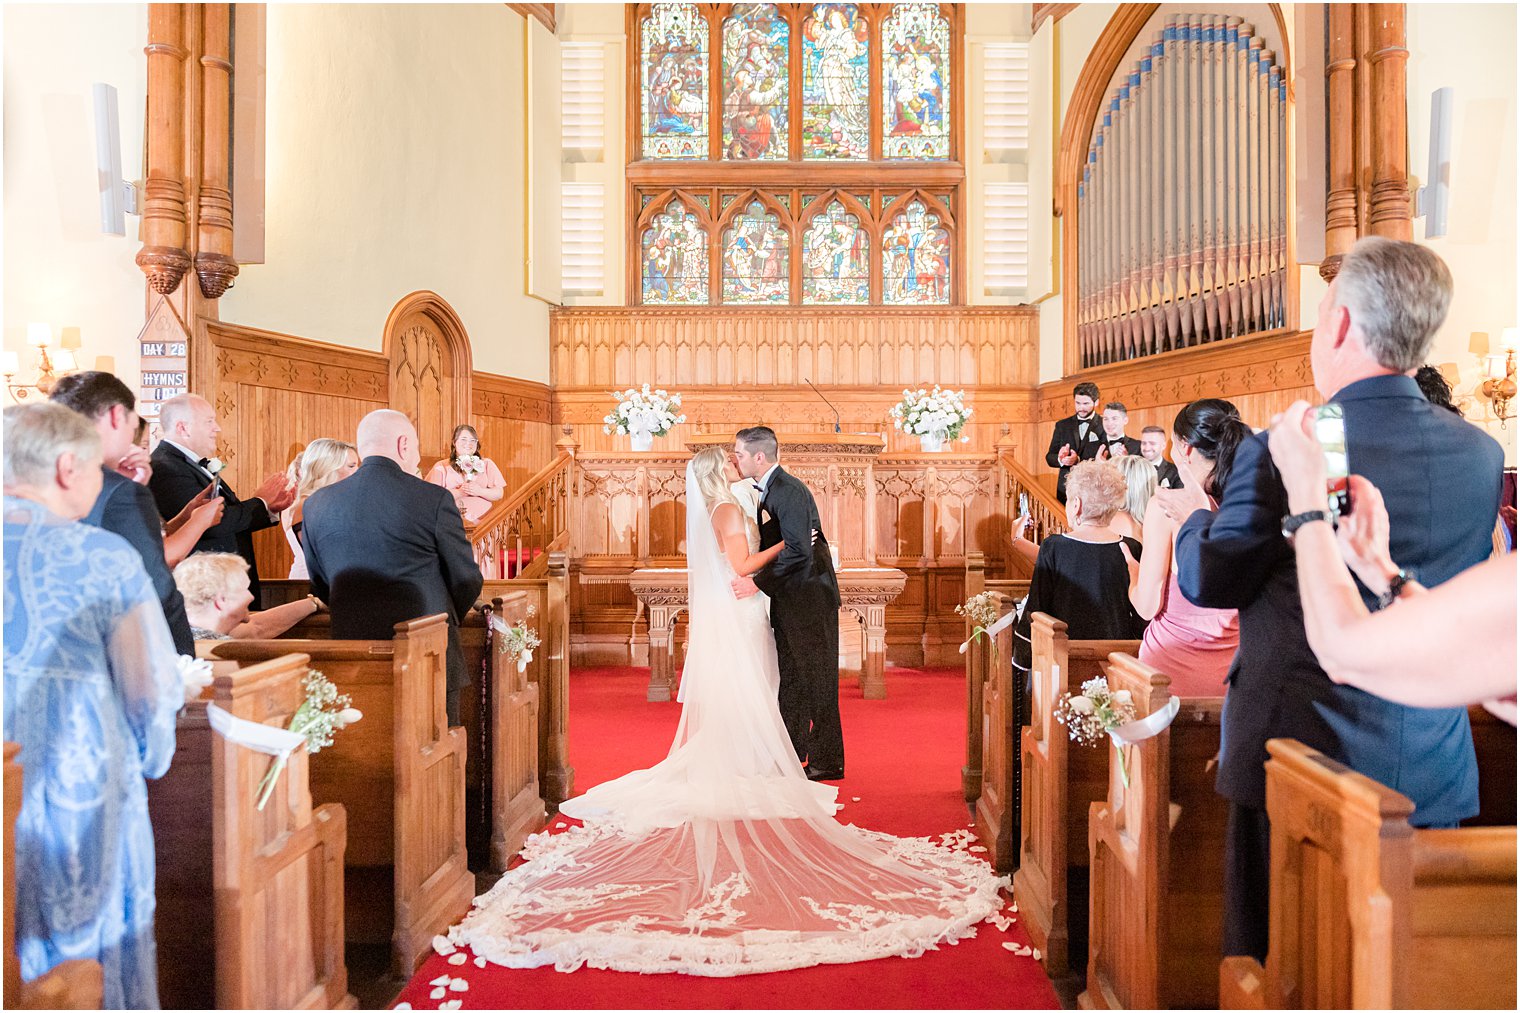 newlyweds kiss by alter after traditional church wedding in New Jersey